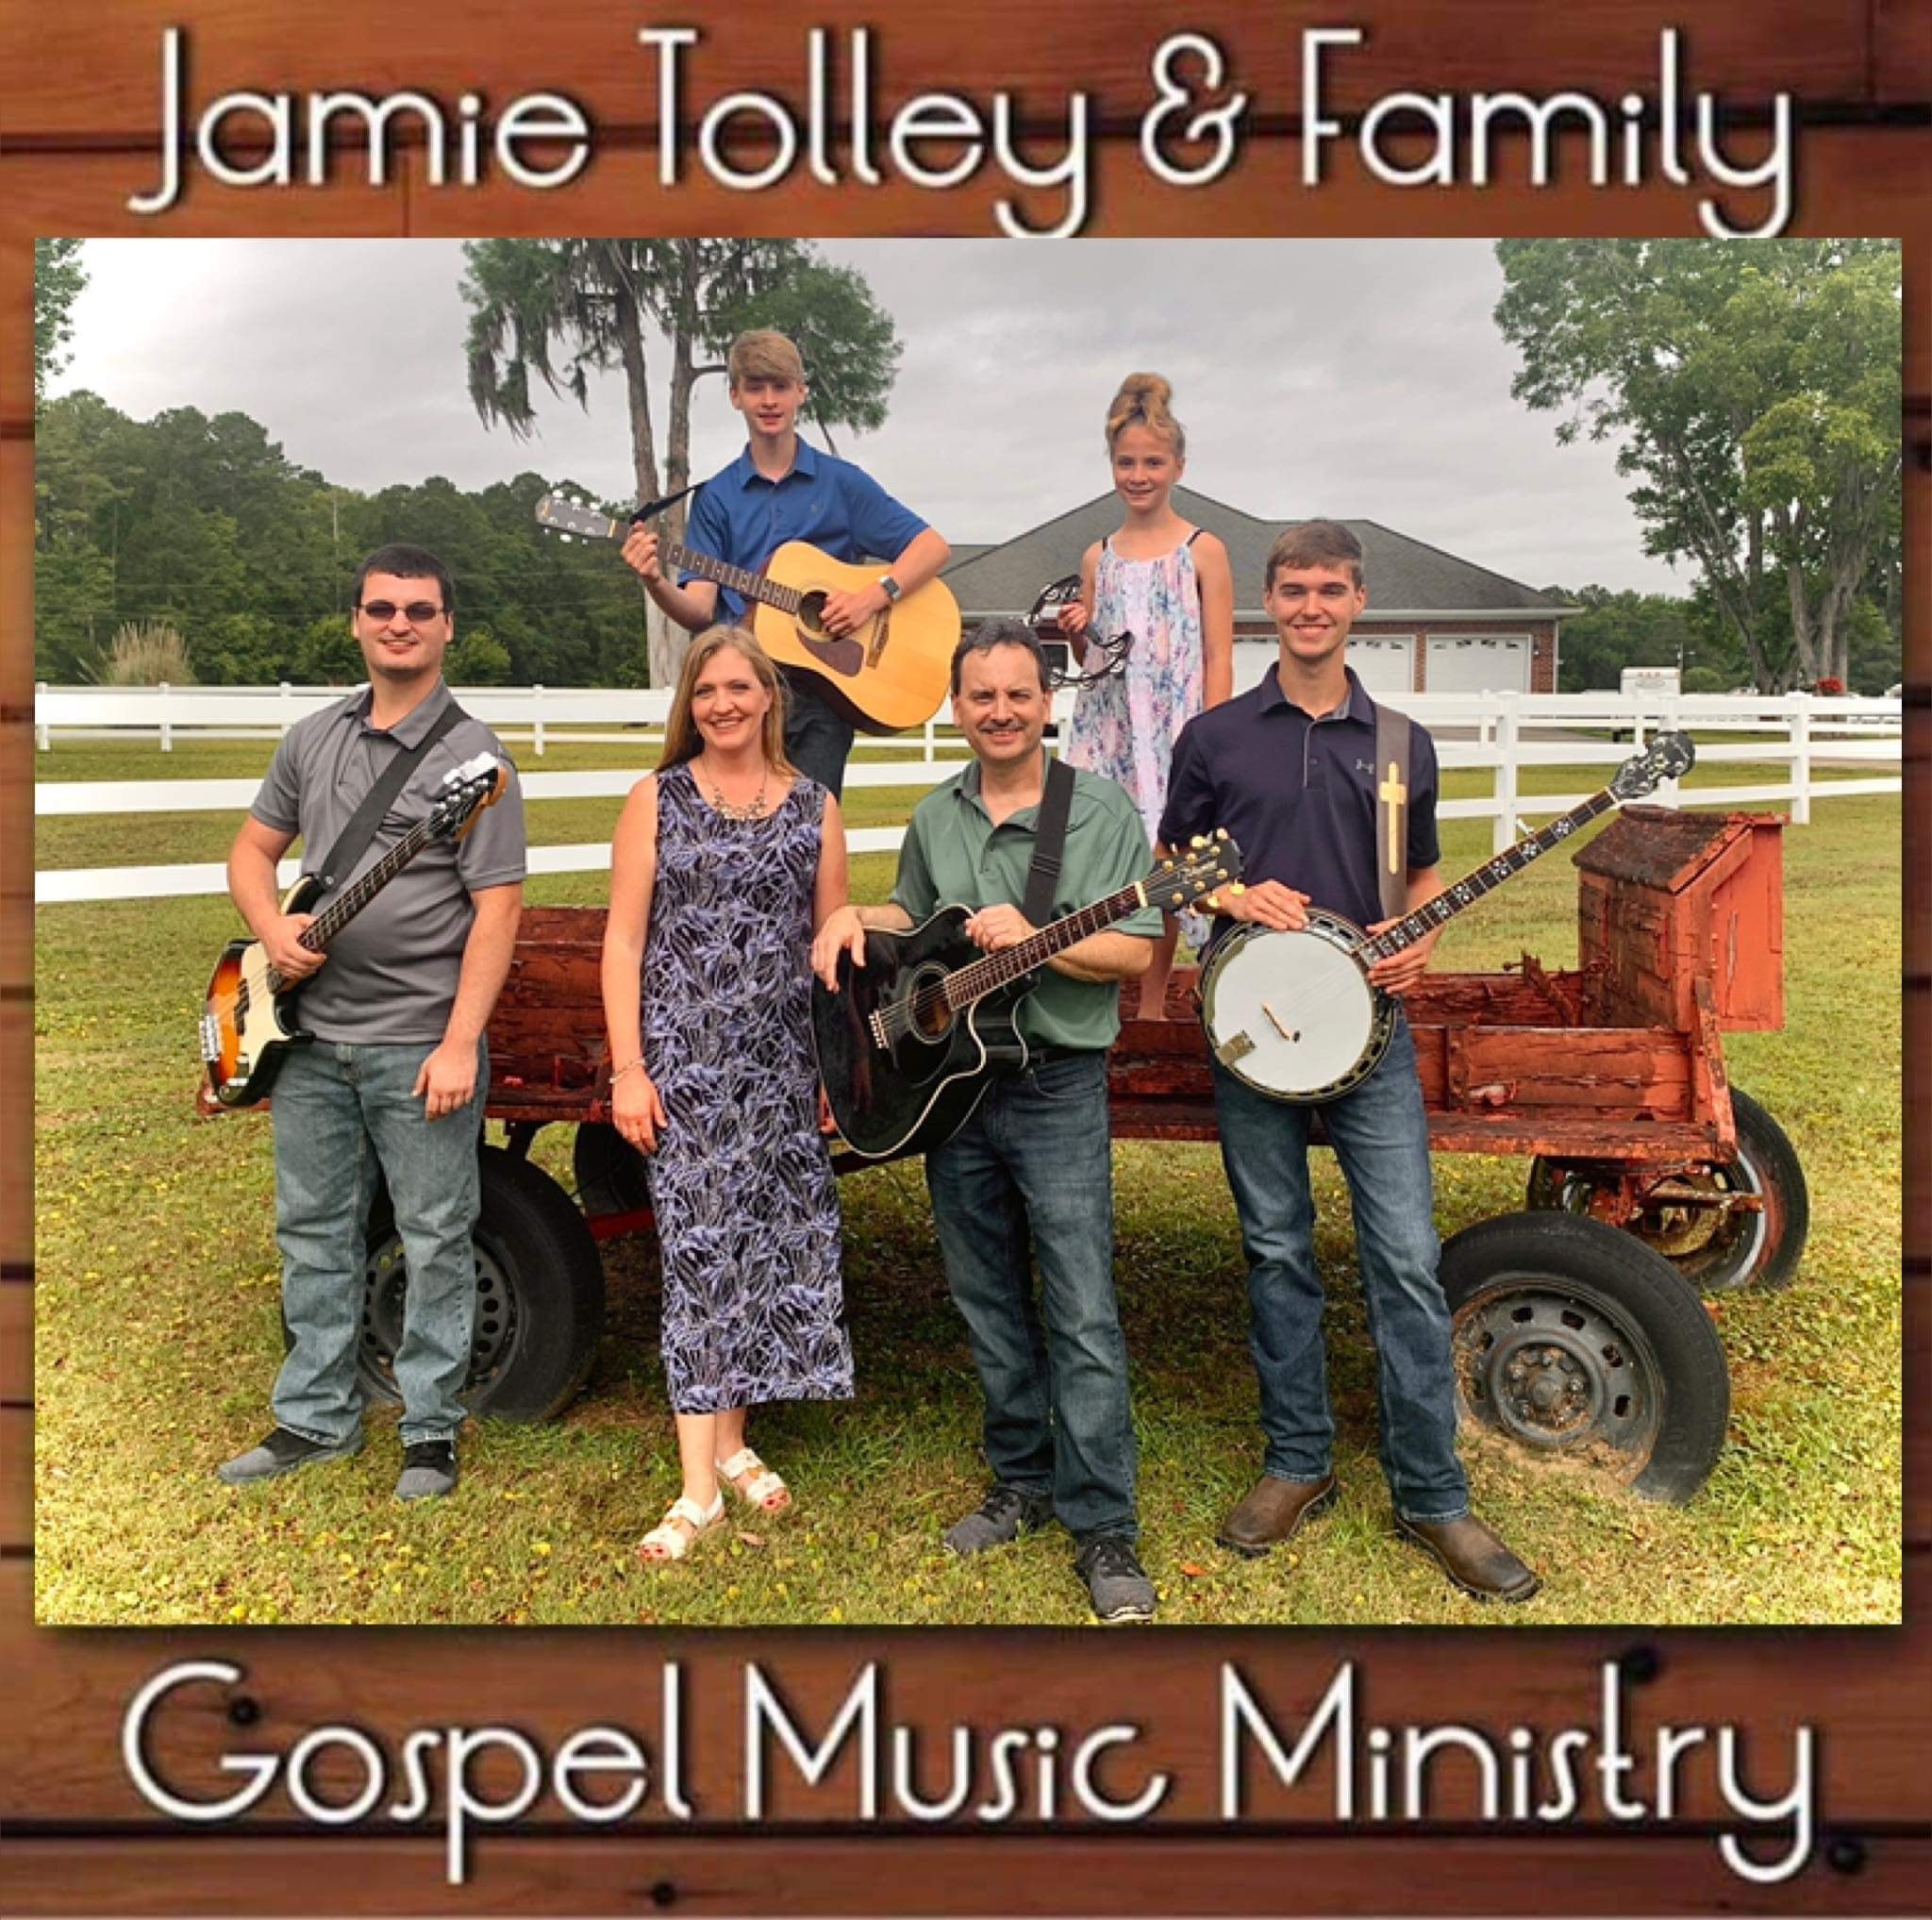 Jamie Tolley & Family